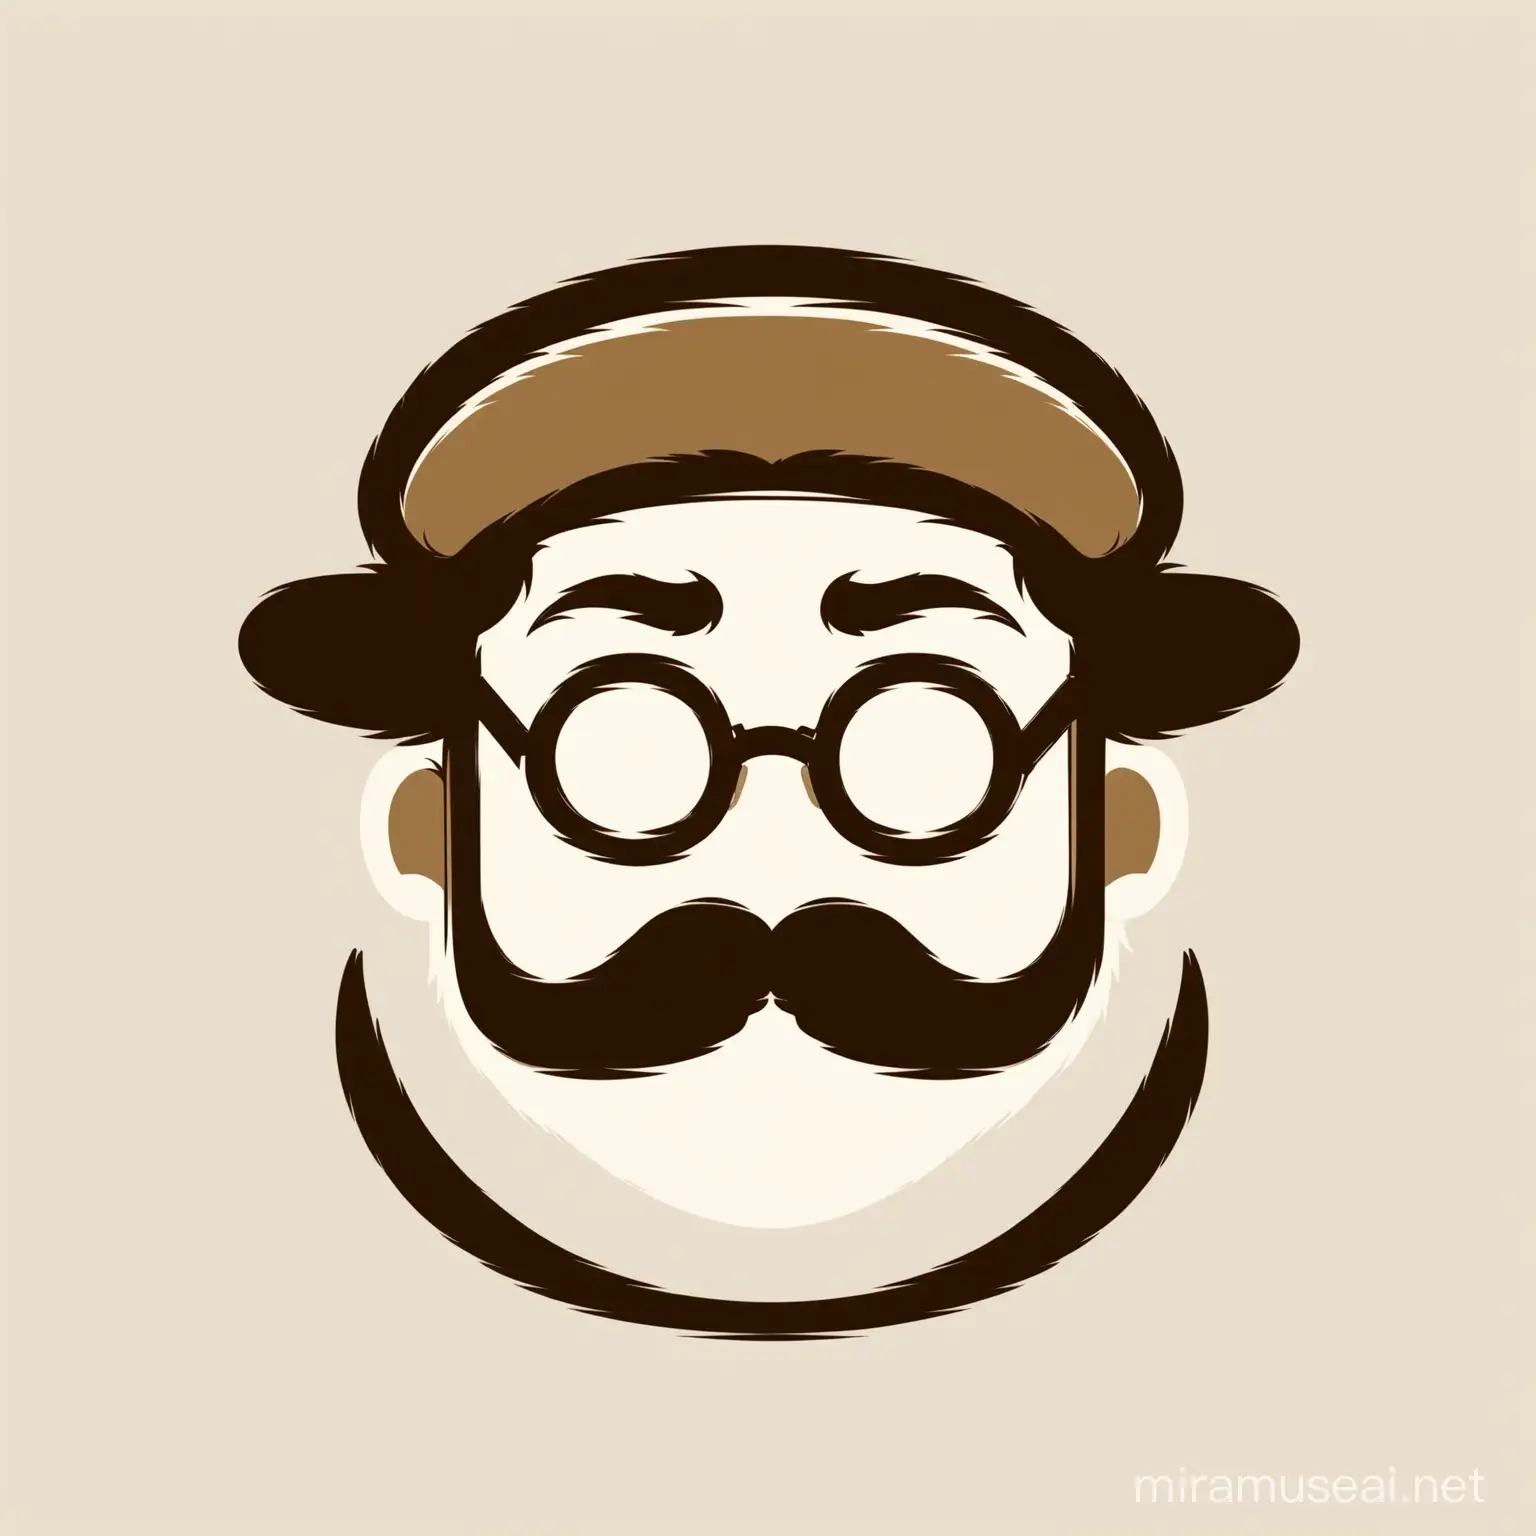 draw a logo by using mustache, glasses and whit out other parts of face. this logo used for a learning website which called "USMUSA"